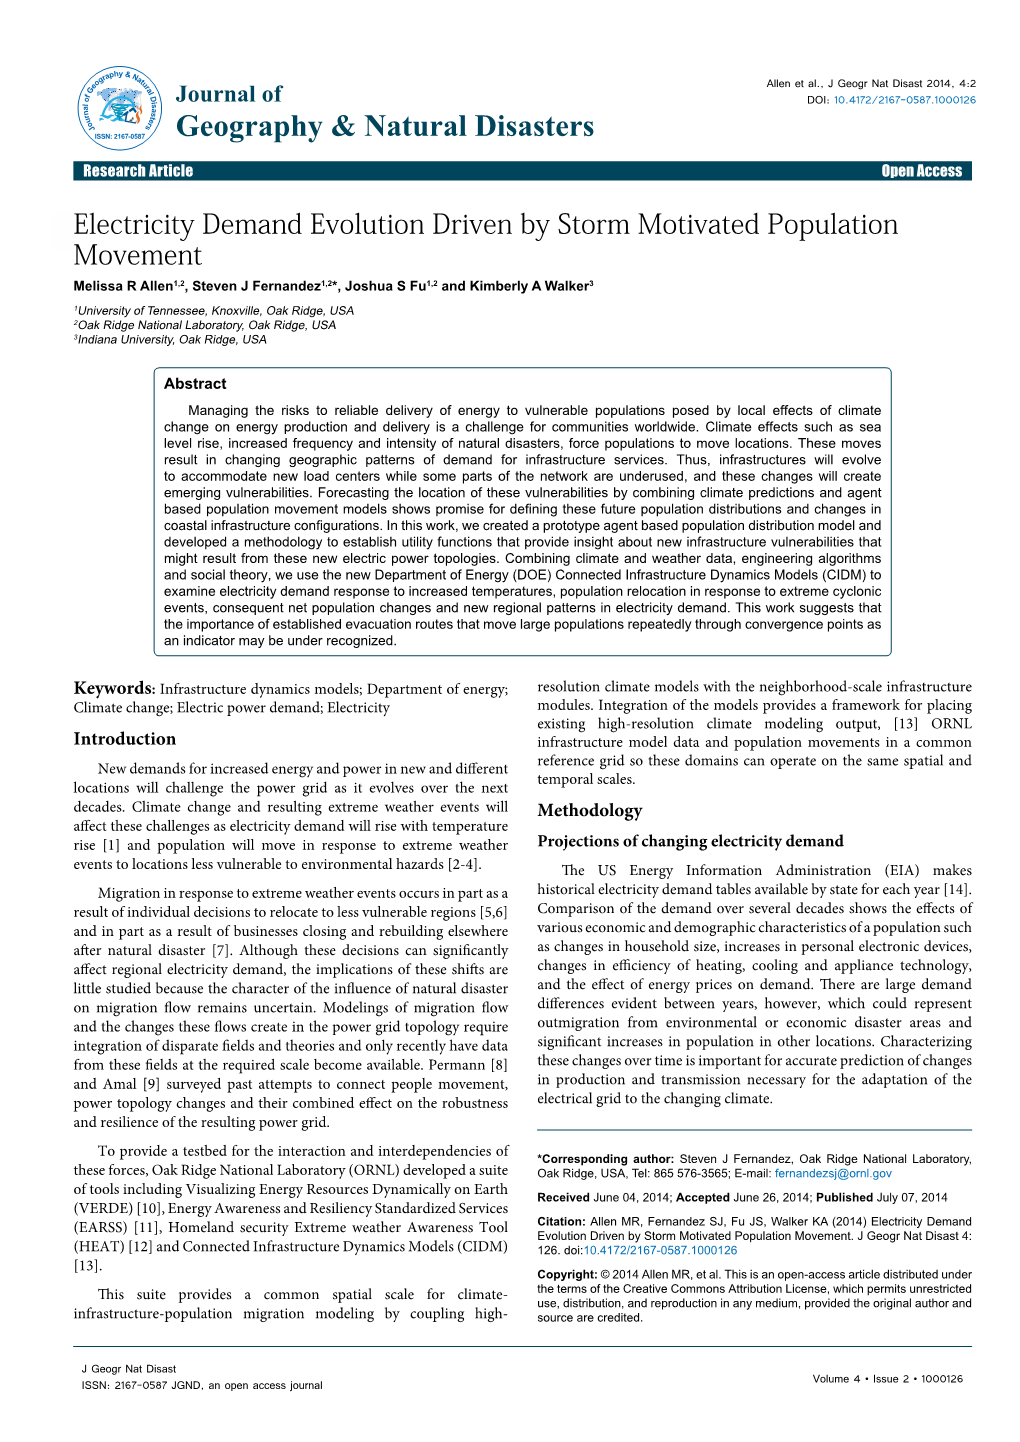 Electricity Demand Evolution Driven by Storm Motivated Population